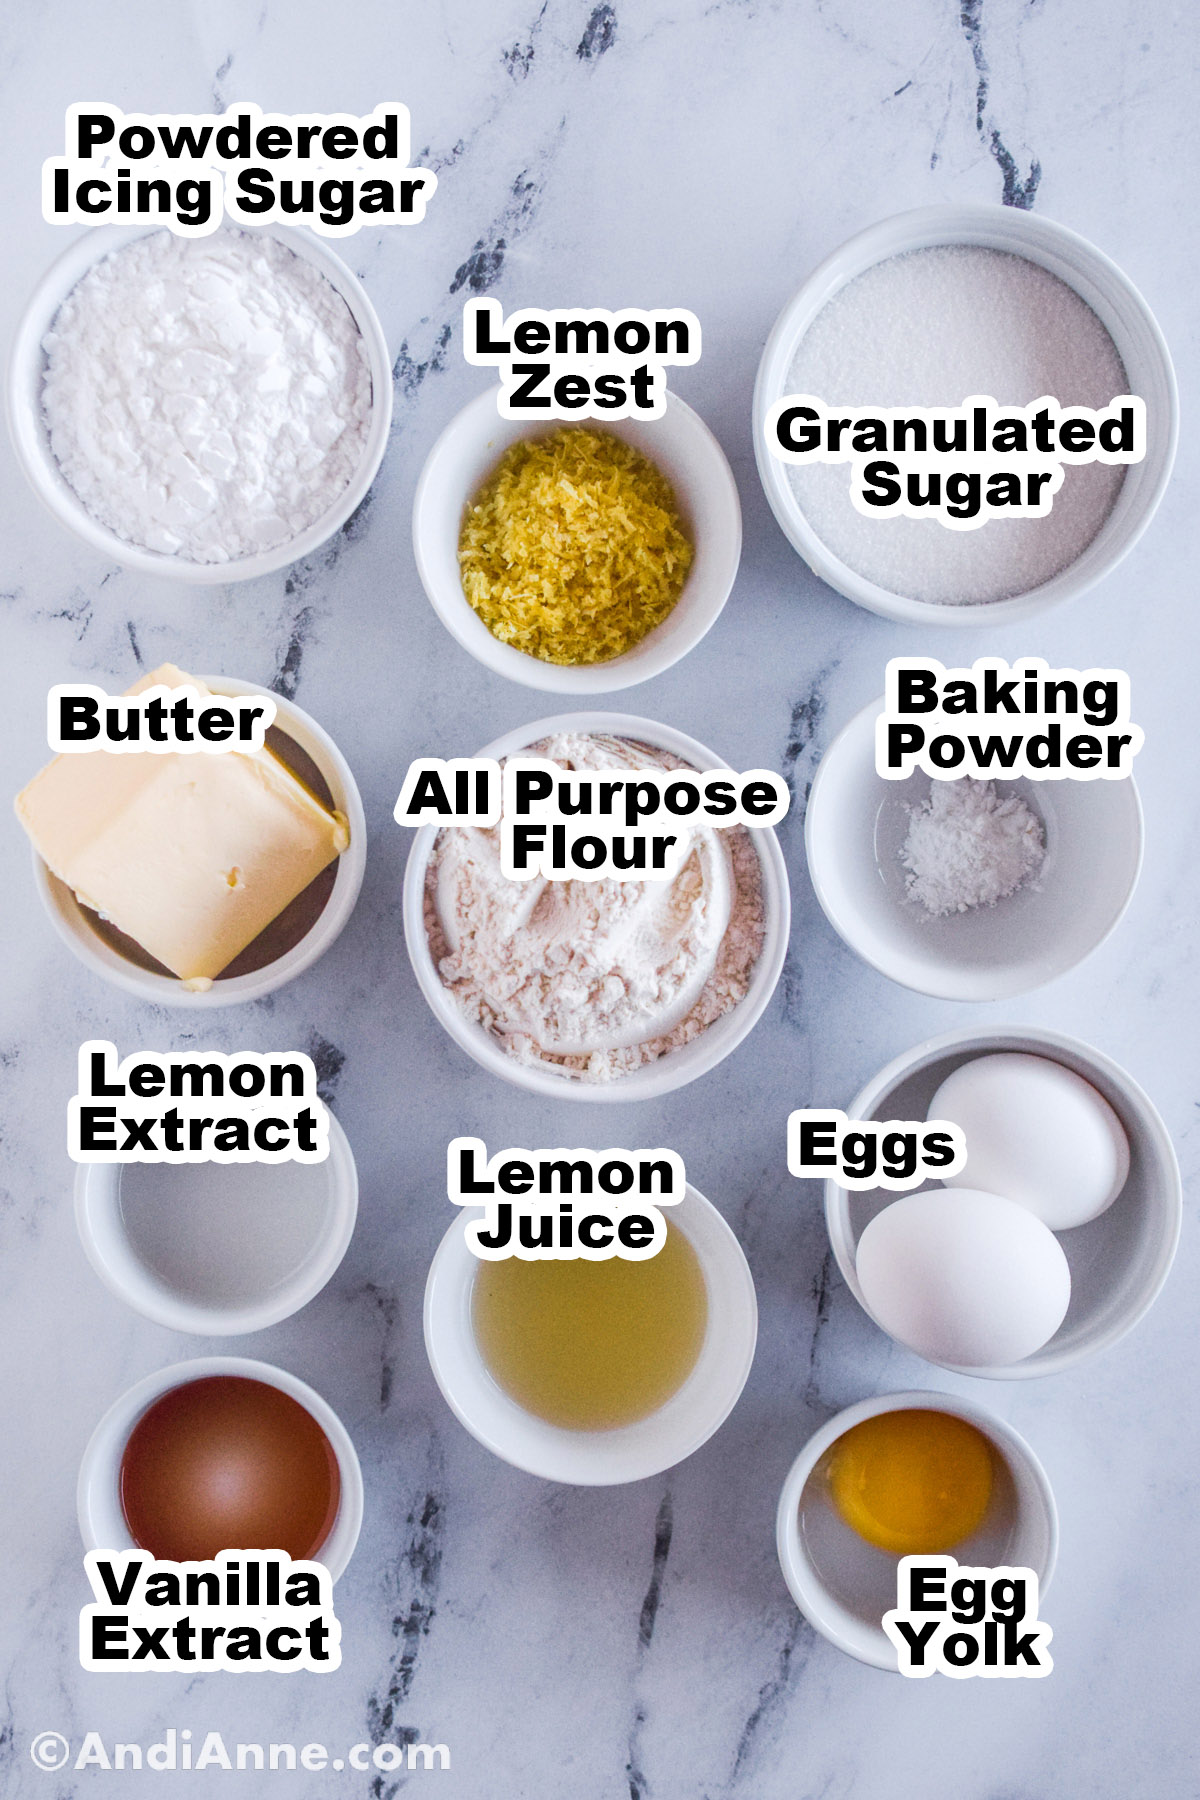 Recipe ingredients on the counter in bowls including powdered icing sugar, lemon zest, granulated sugar, butter, flour, baking powder, lemon extract, lemon juice, eggs, vanilla extract and egg yolk.